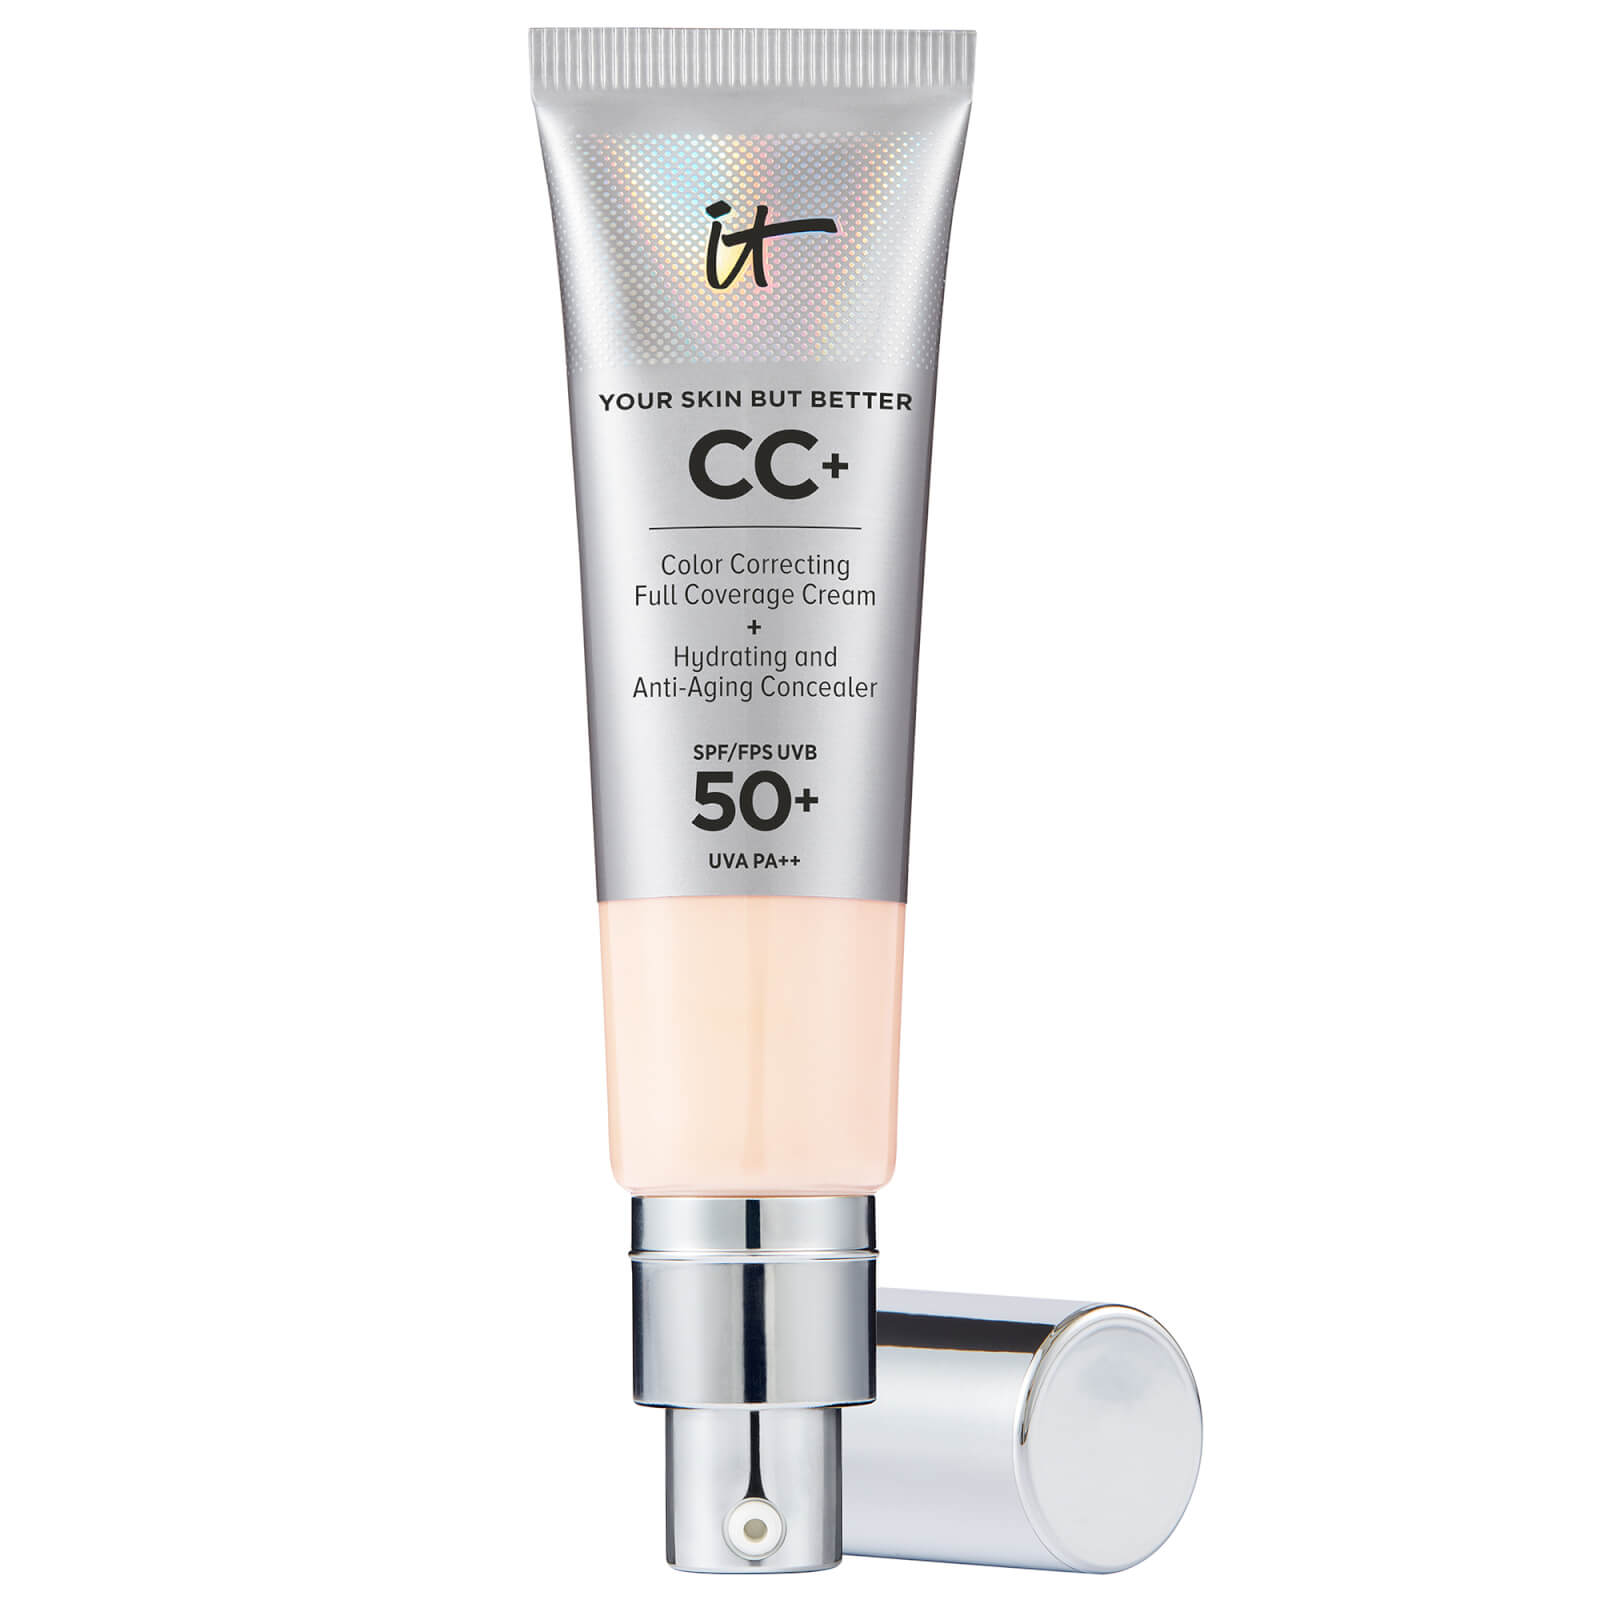 IT Cosmetics Your Skin But Better CC+ Cream with SPF50 32ml (Various Shades) - Fair Beige